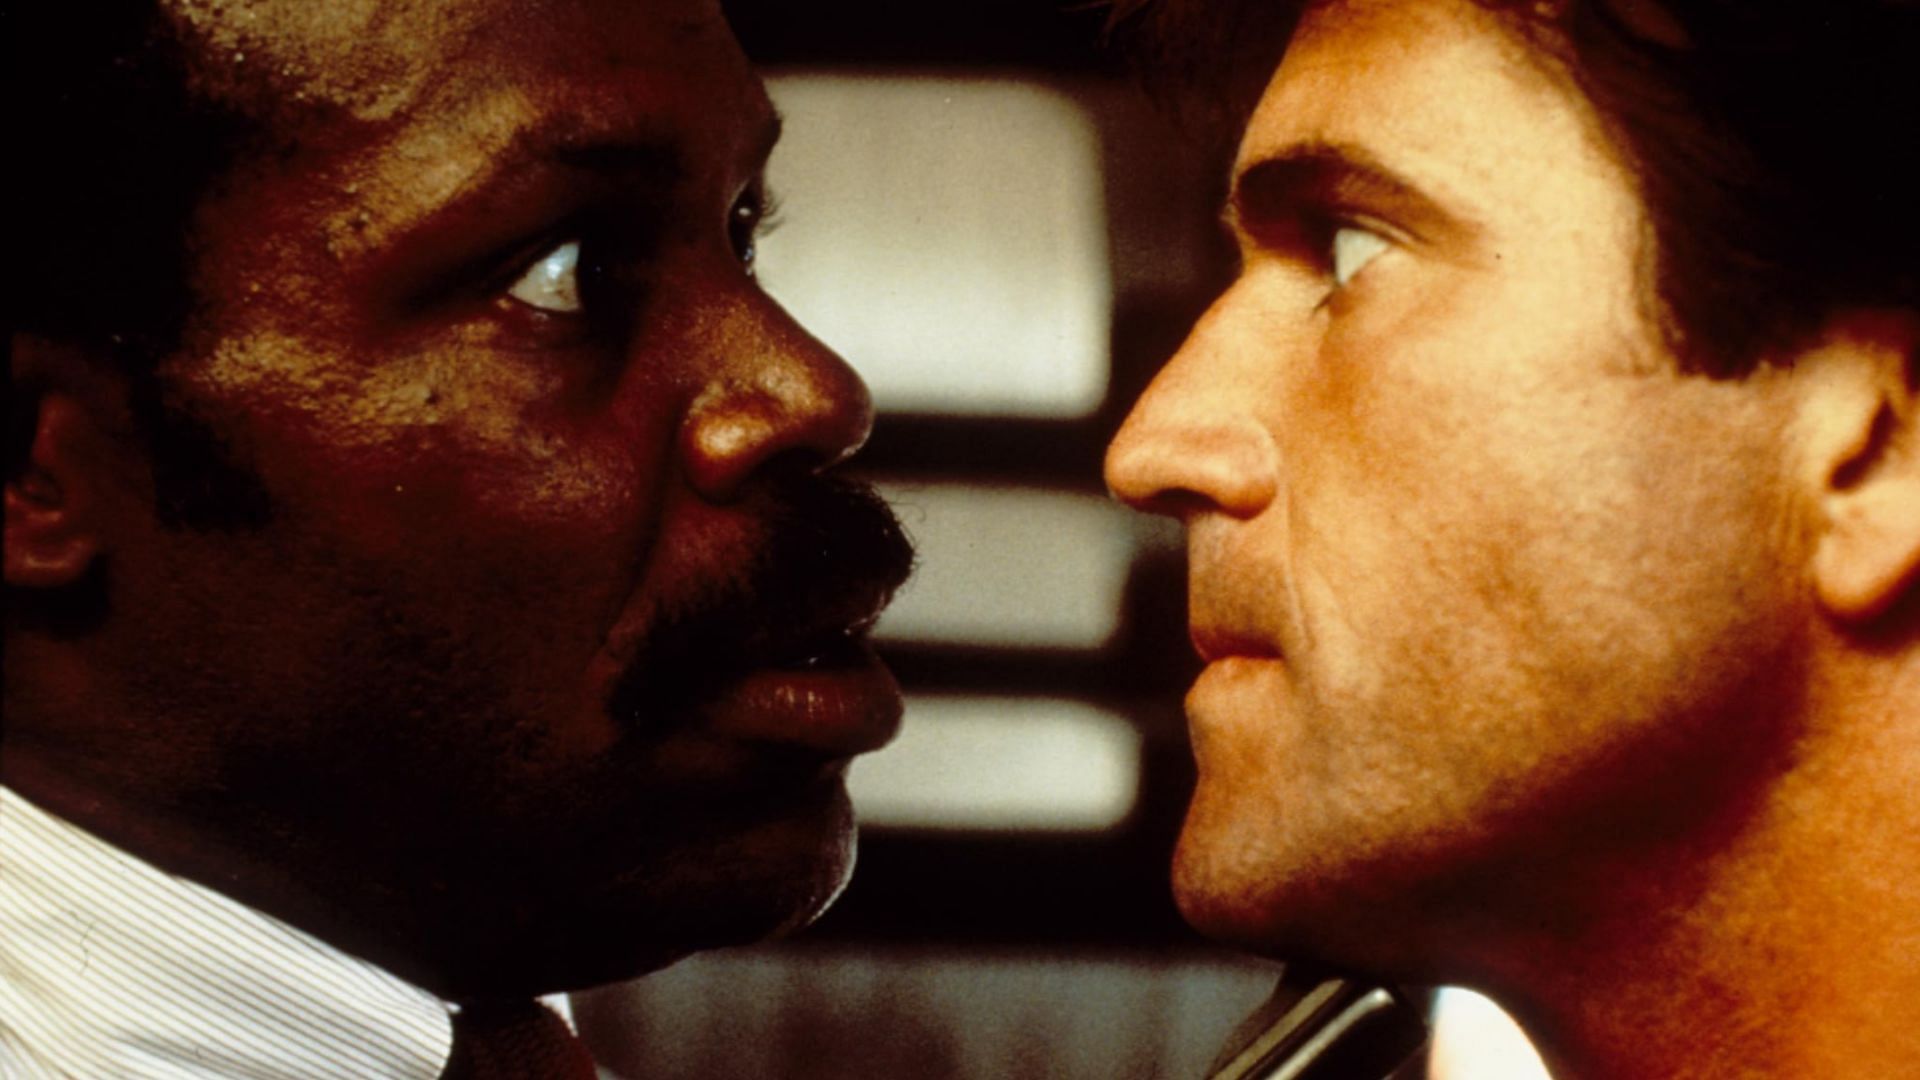 Directed by Richard Donner, it is one of the most popular buddy cop movies of all time (Image via Warner Bros Pictures)